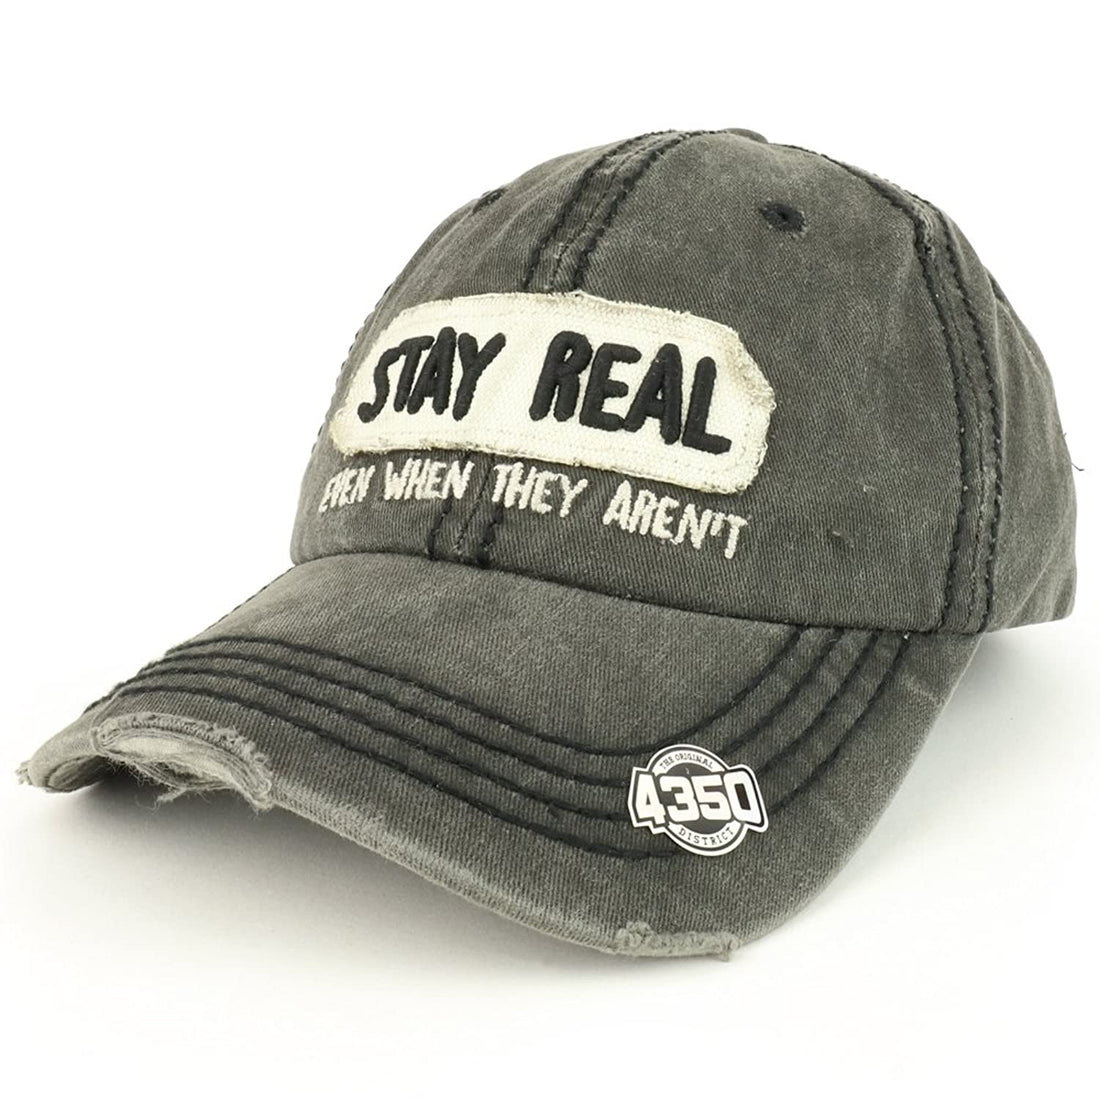 Trendy Apparel Shop Stay Real Even When They Aren't Embroidered Frayed Vintage Baseball Cap